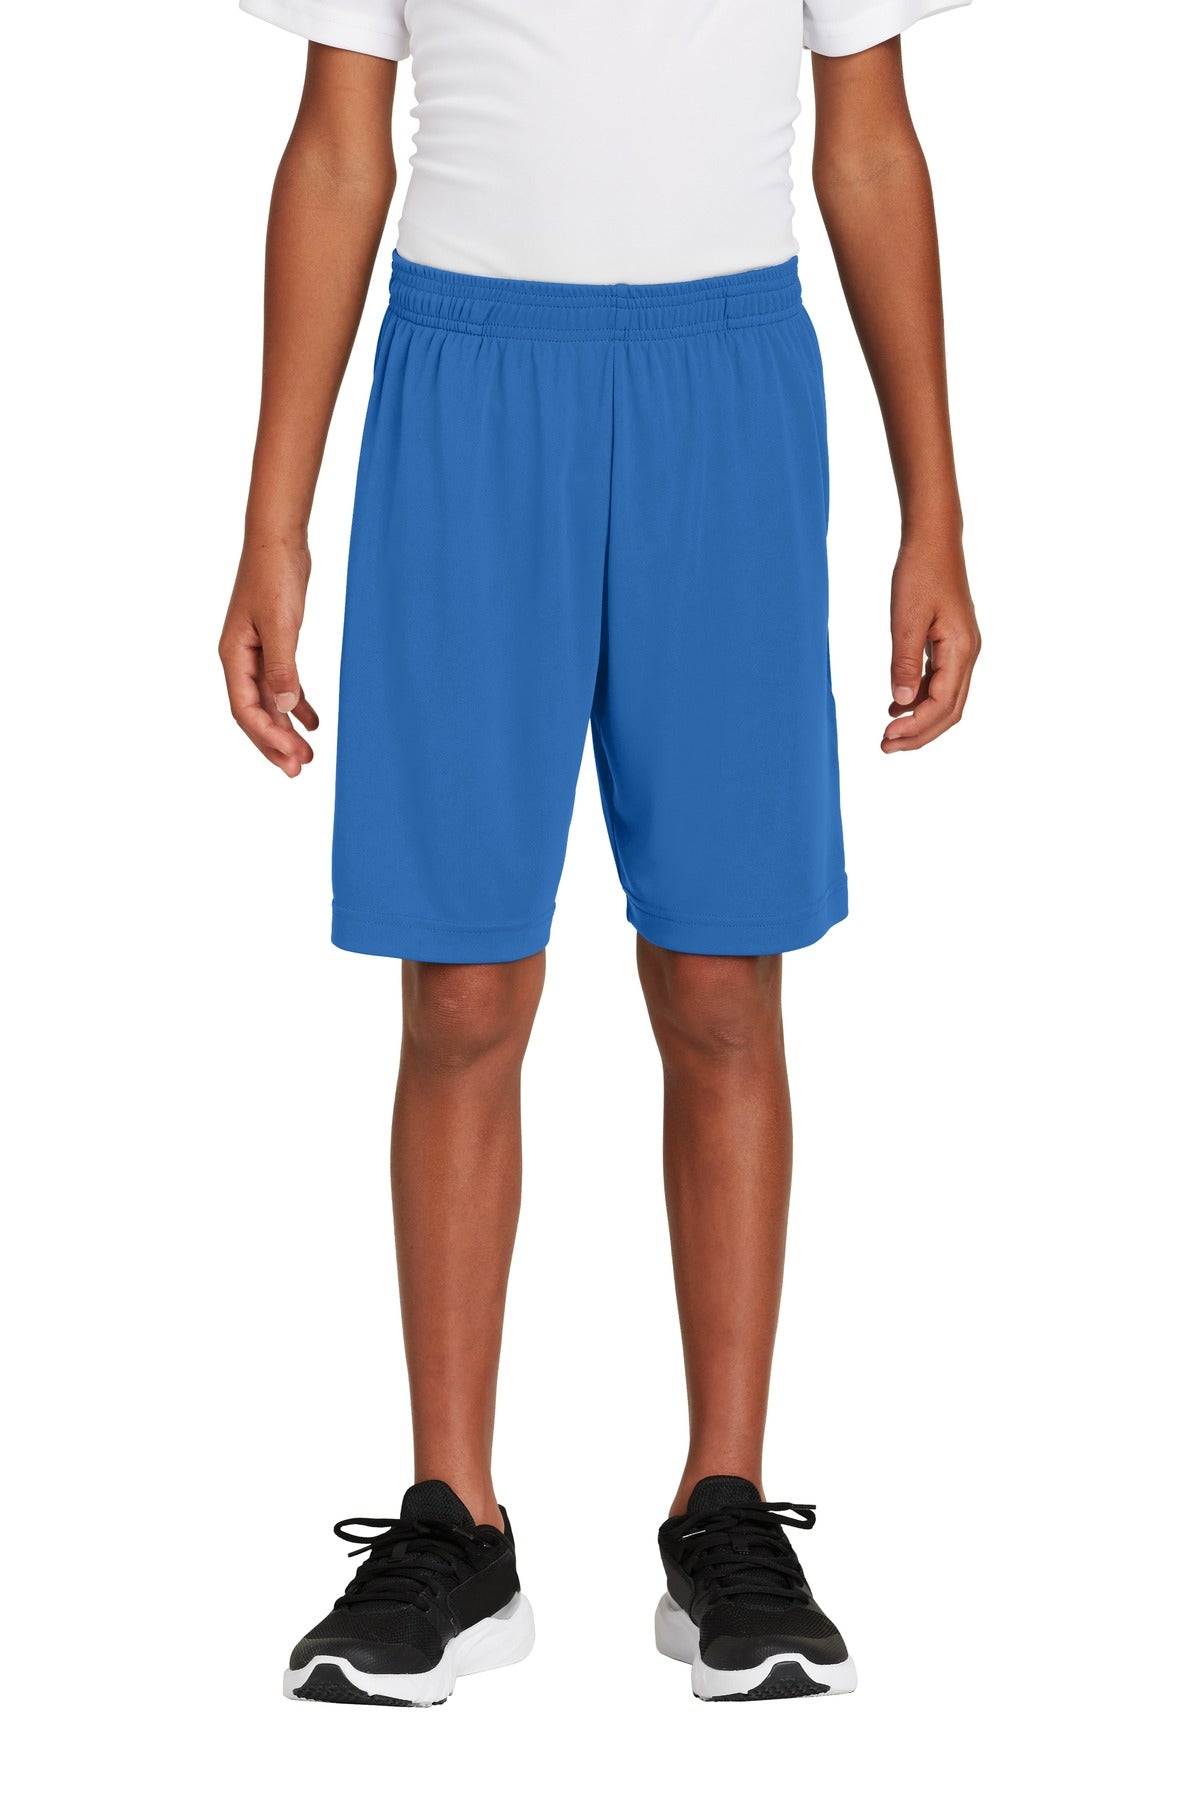 Sport-Tek Youth PosiCharge Competitor ™ Pocketed Short. YST355P